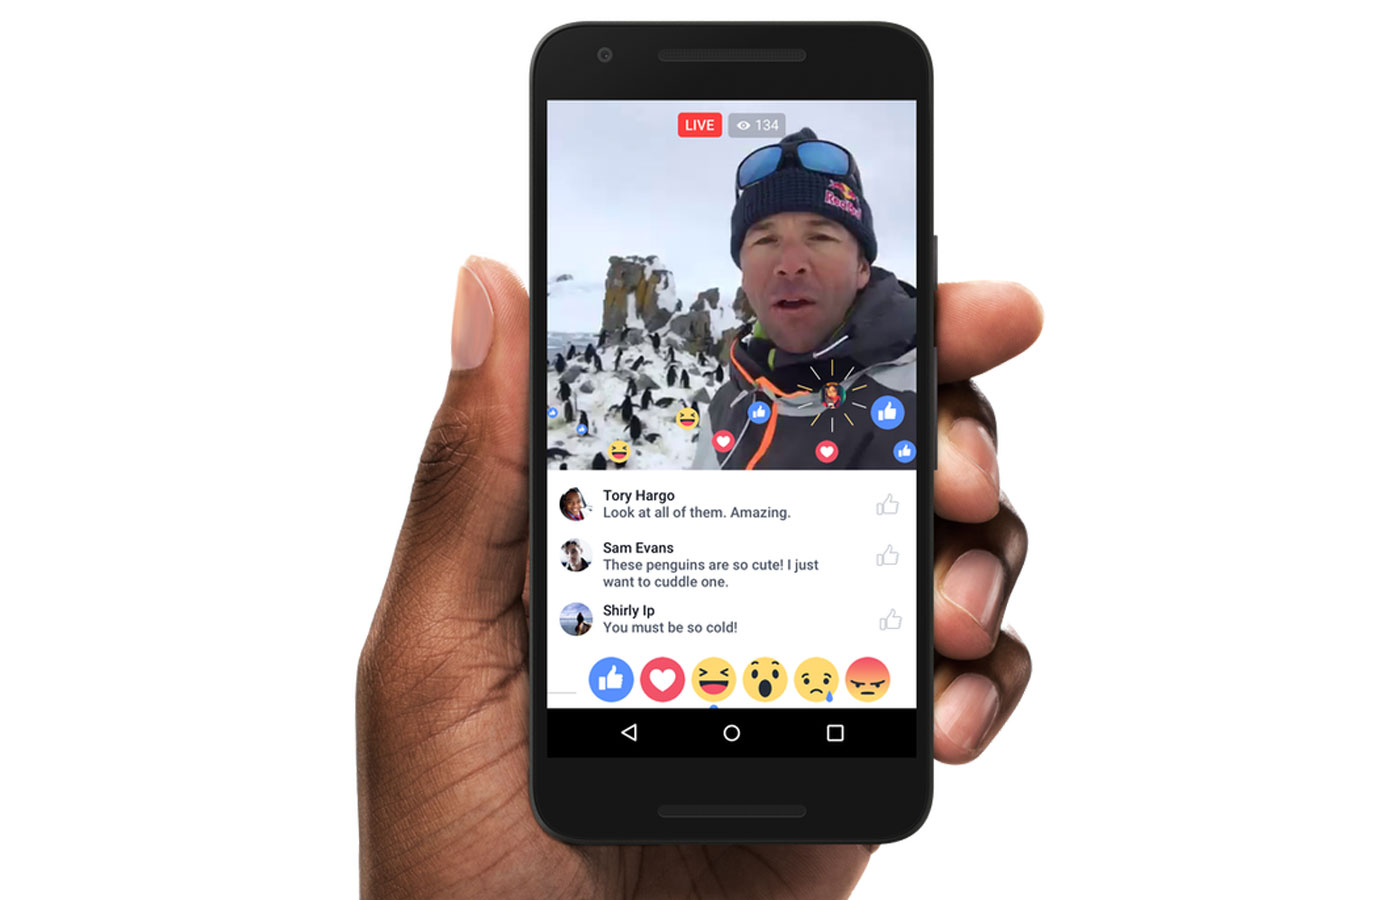 Facebook Live video replays will highlight the best moments